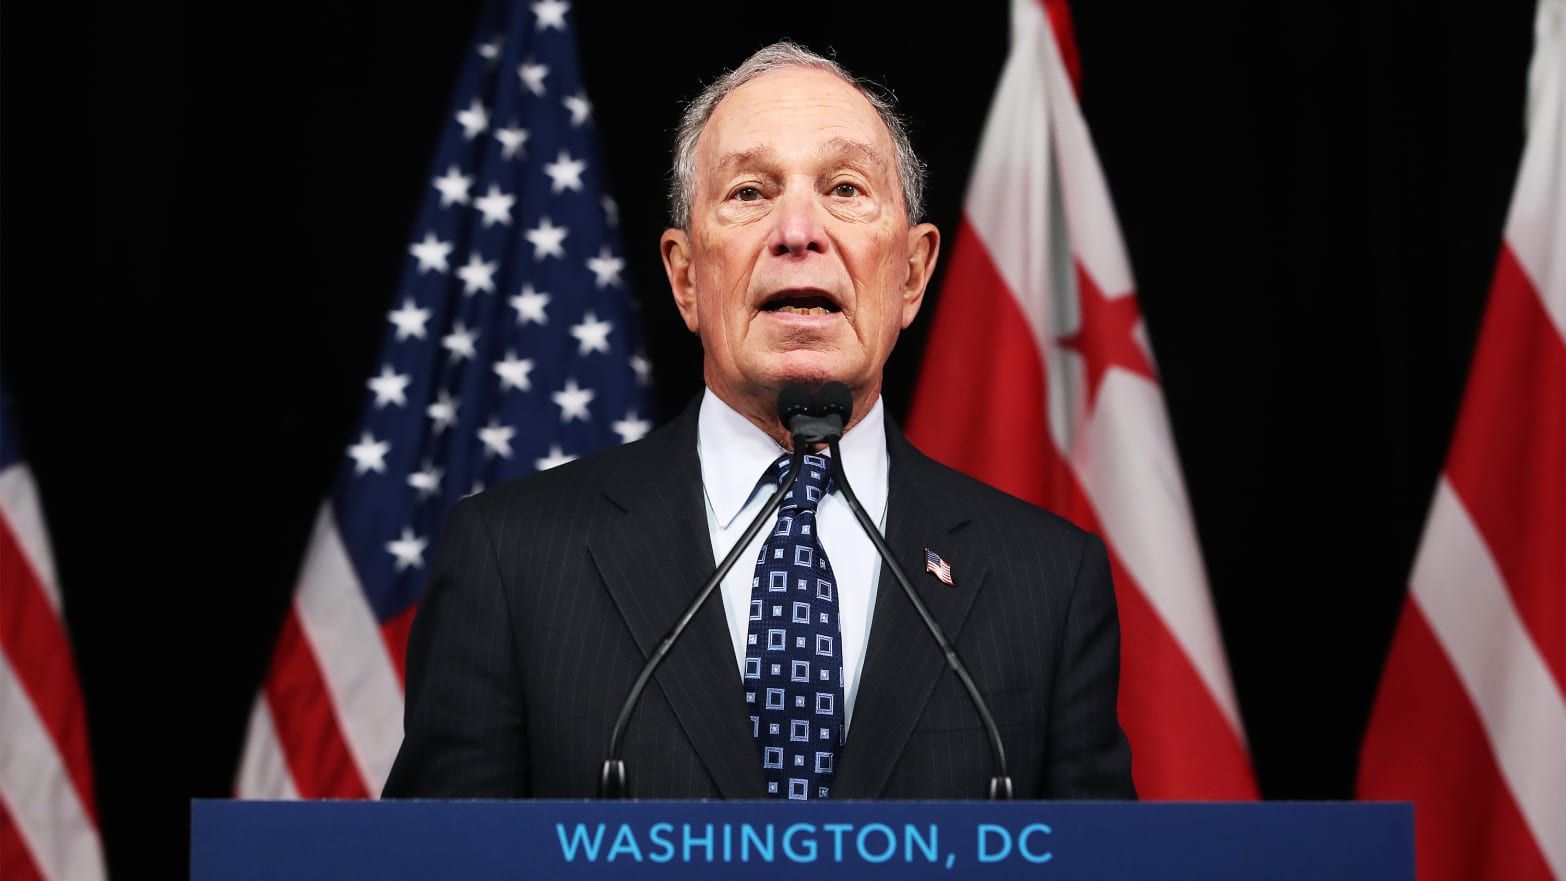 Michael Bloomberg Has Spent $38 Every Second of His Campaign